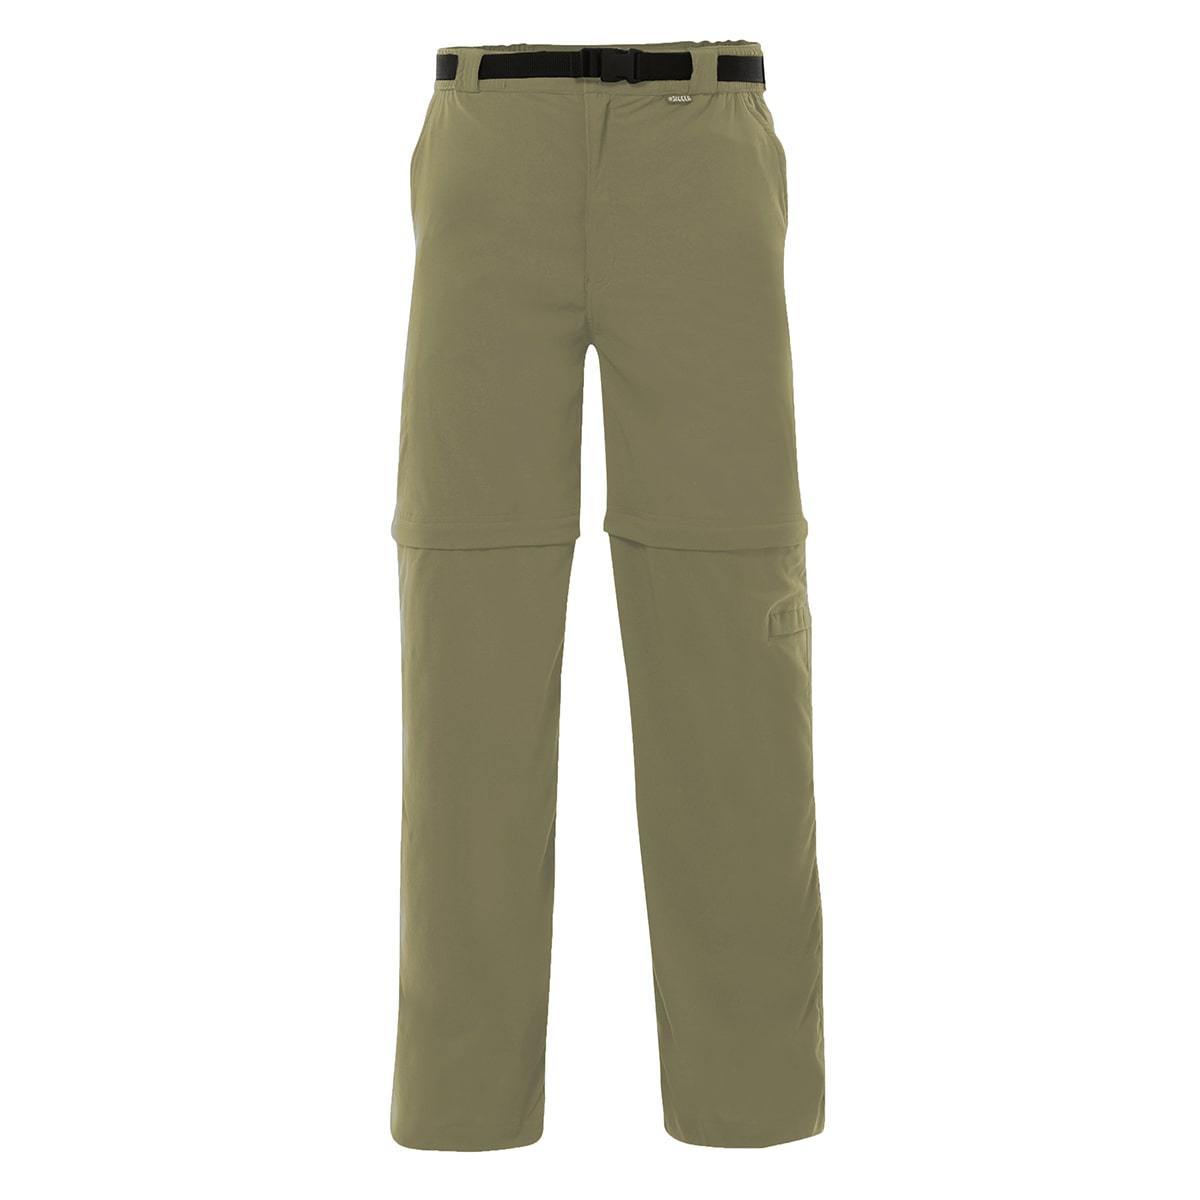 Keela, Keela Paraguay Zip-Off Trousers, Trousers & Shorts,Wylies Outdoor World,